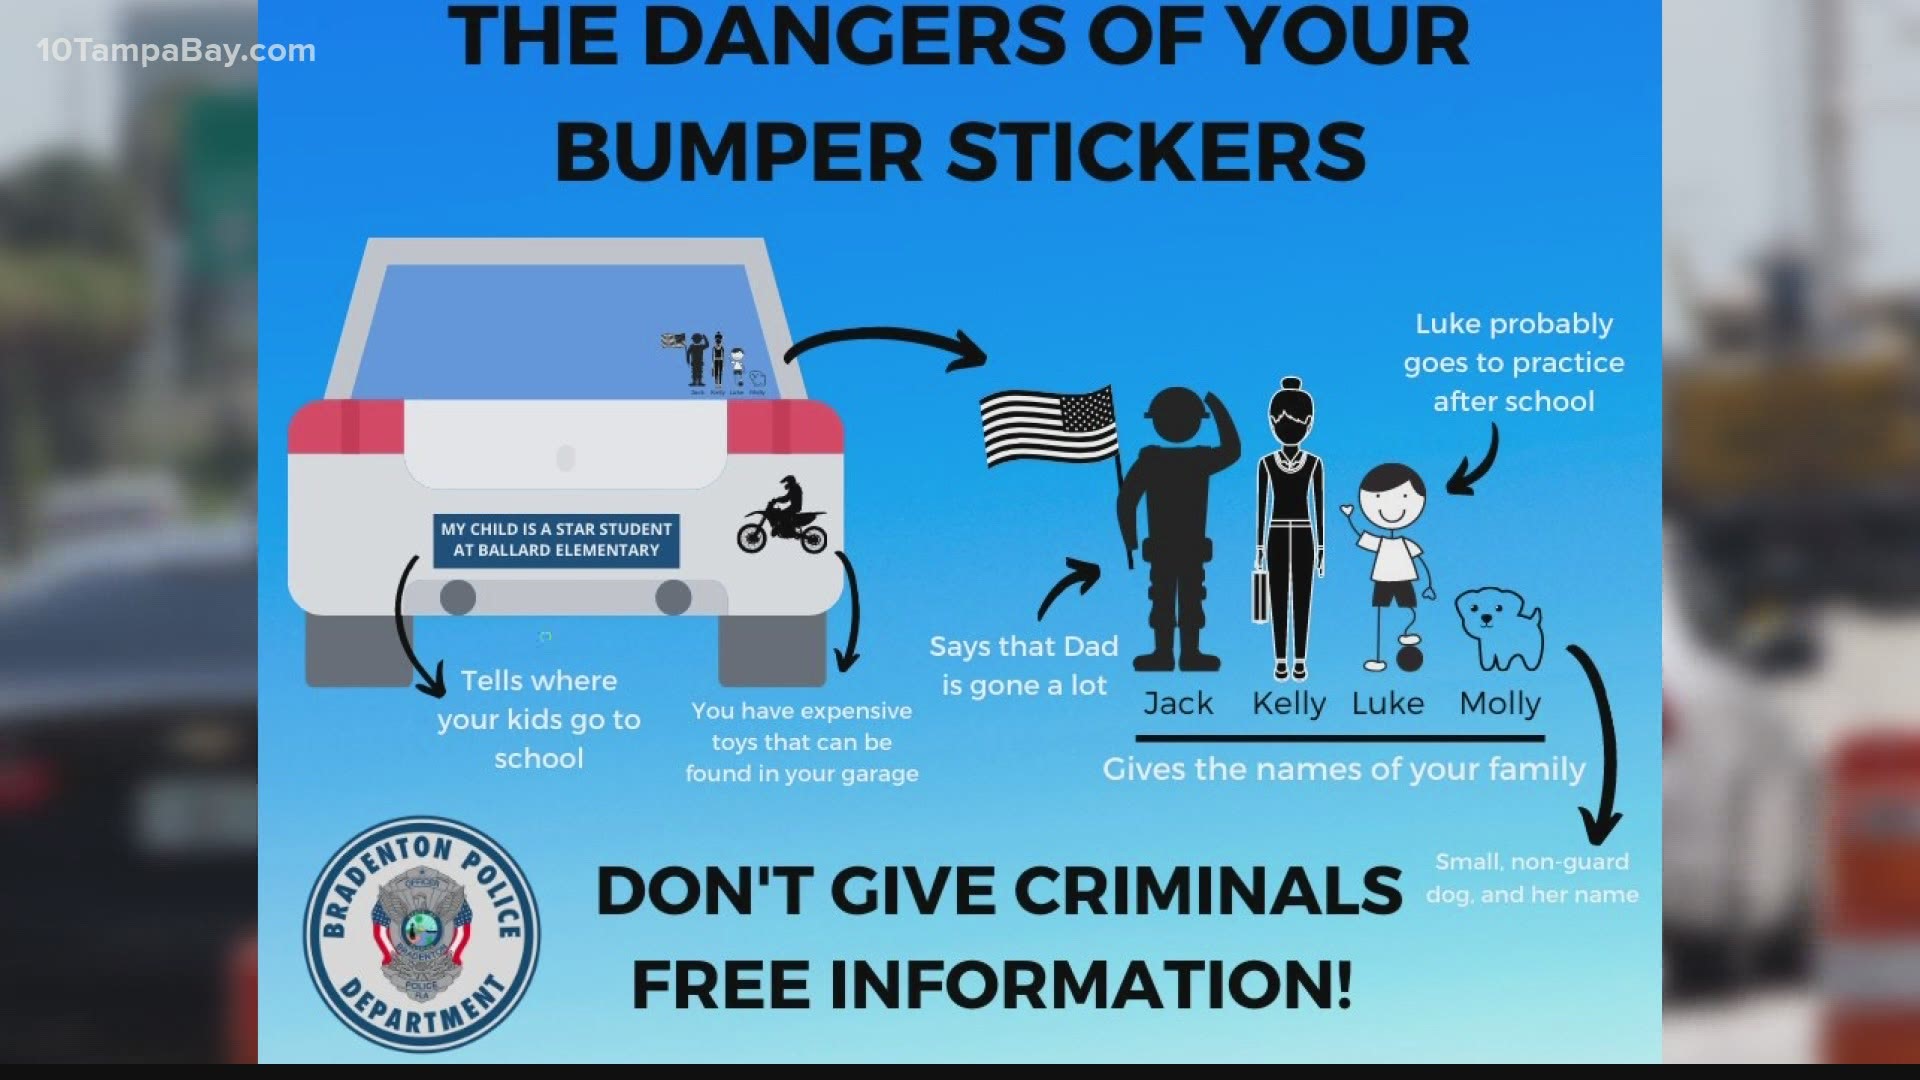 Decals could give away too much information about your personal life, making it easier for criminals to target you.